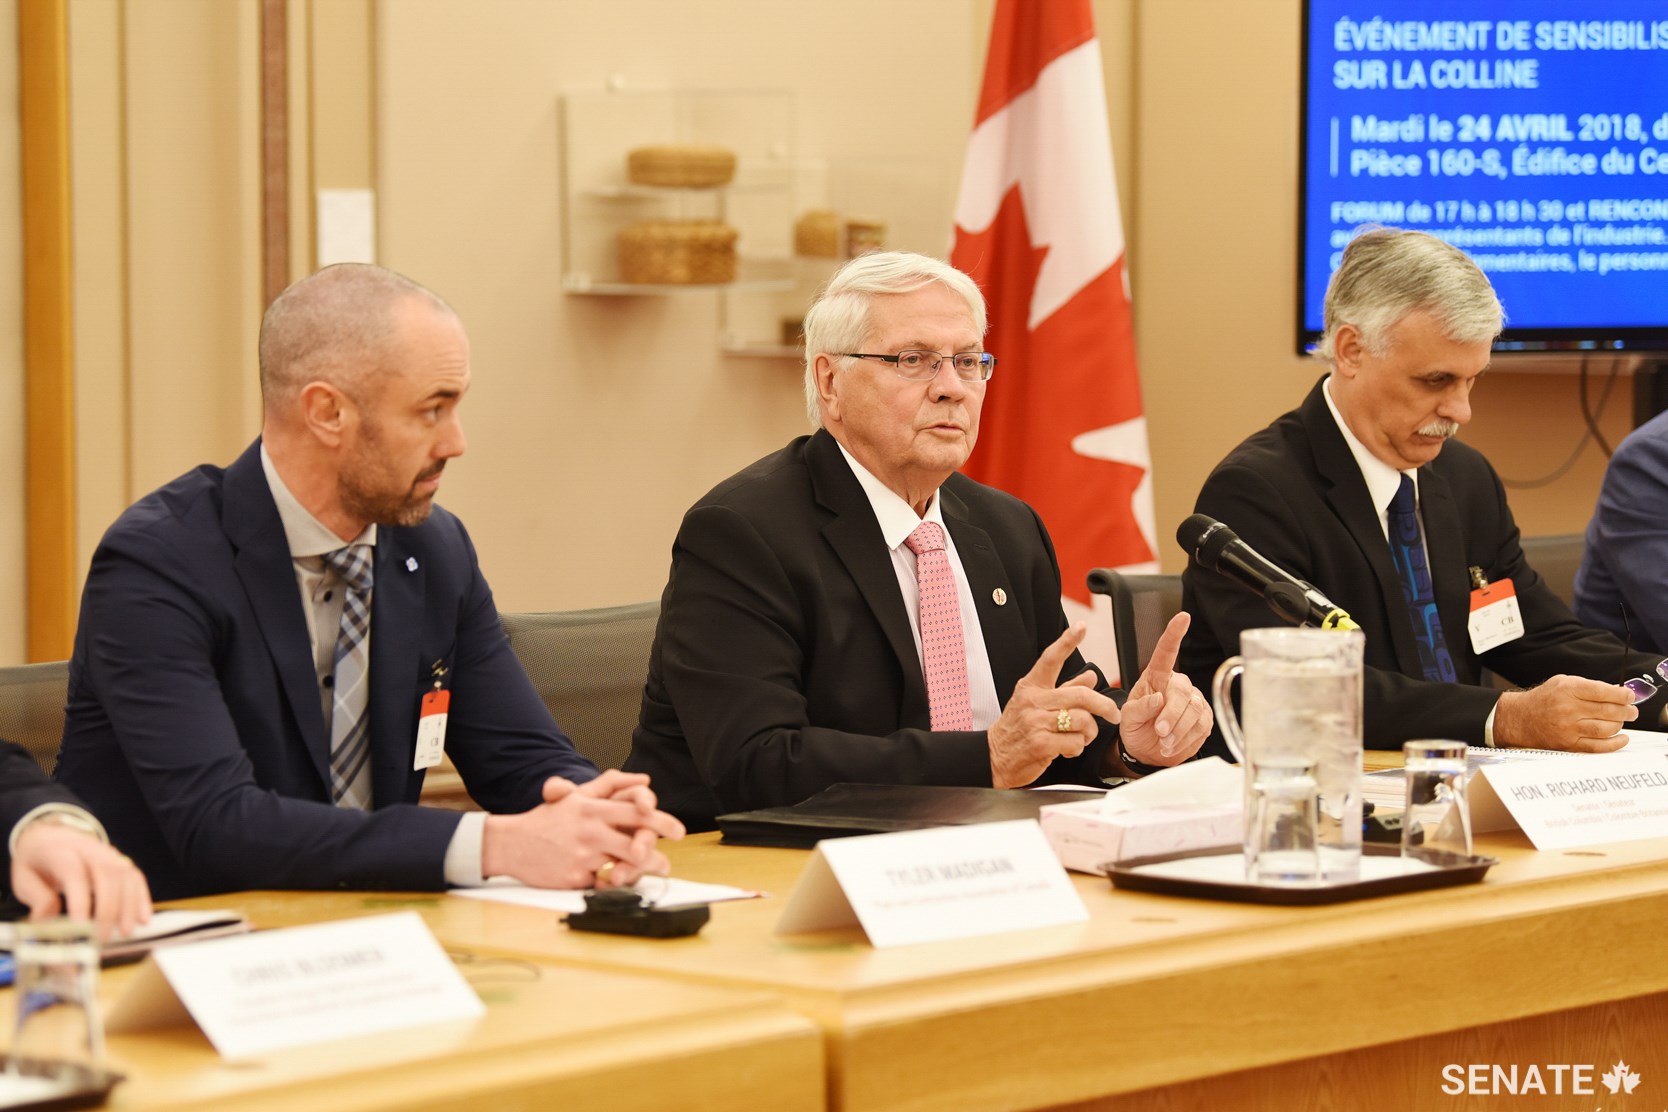 Senator Richard Neufeld, centre, chairs a panel discussion for the Tanker and Pipeline Safety Awareness Session on April 24, 2018, in Ottawa.